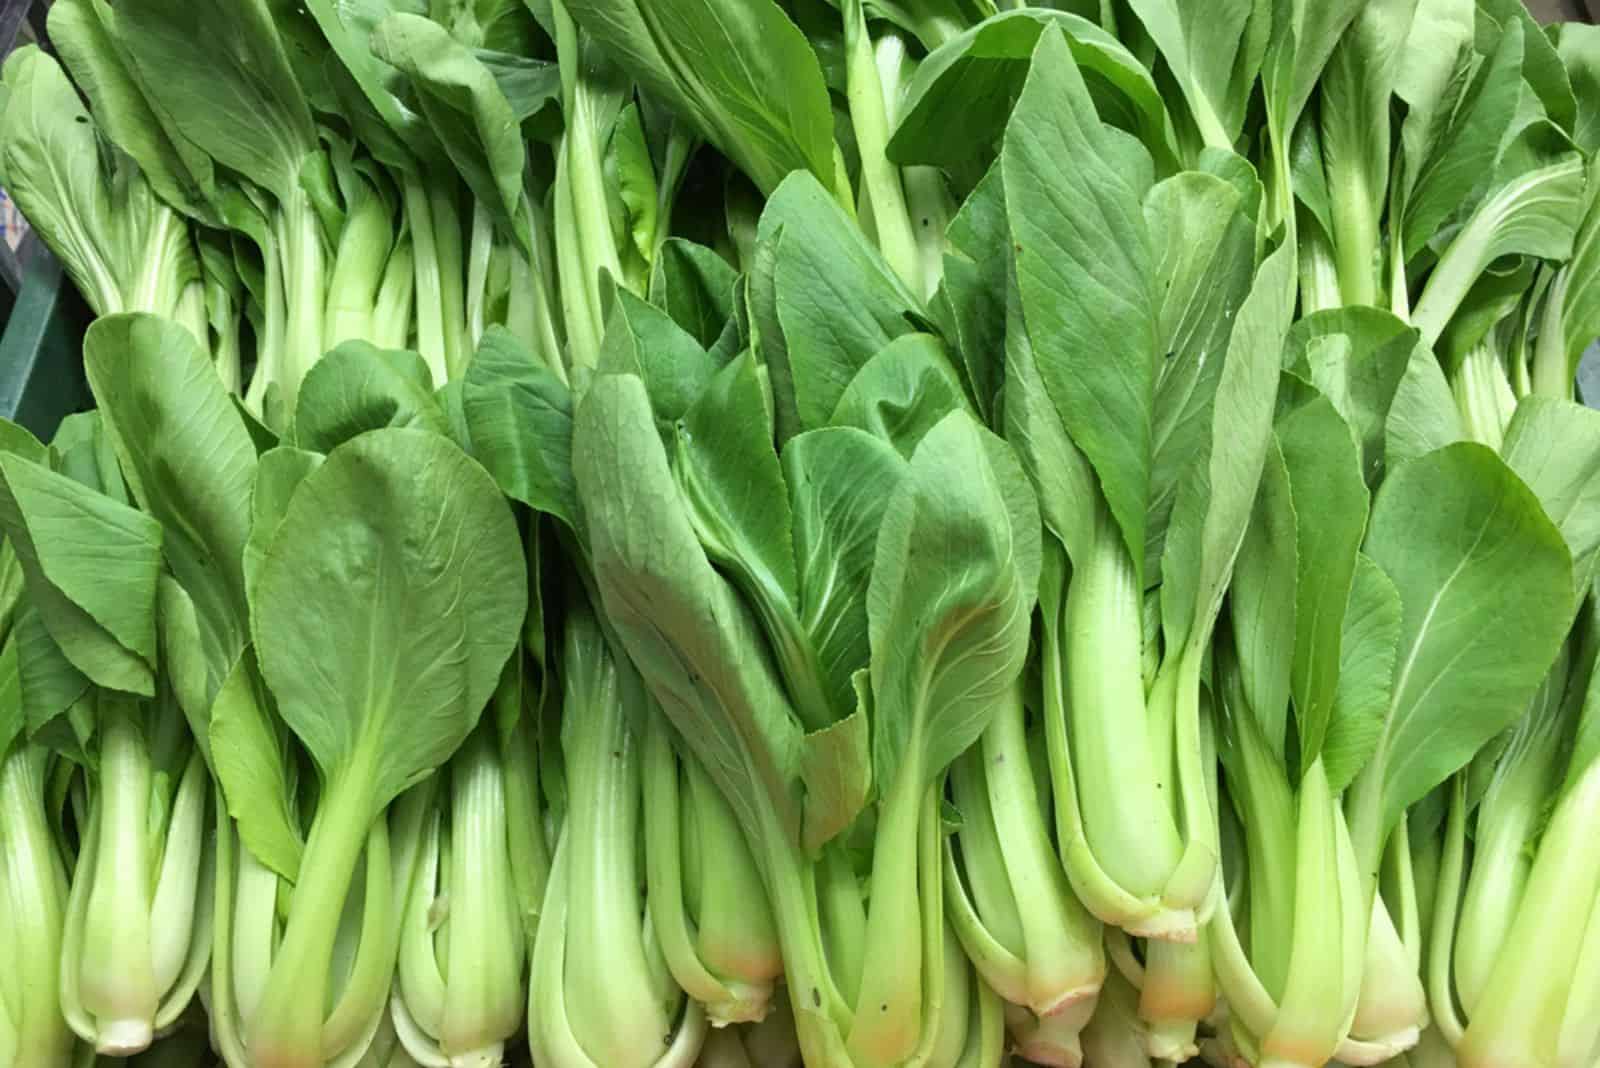 Assortment of whole and sliced raw baby bok choy